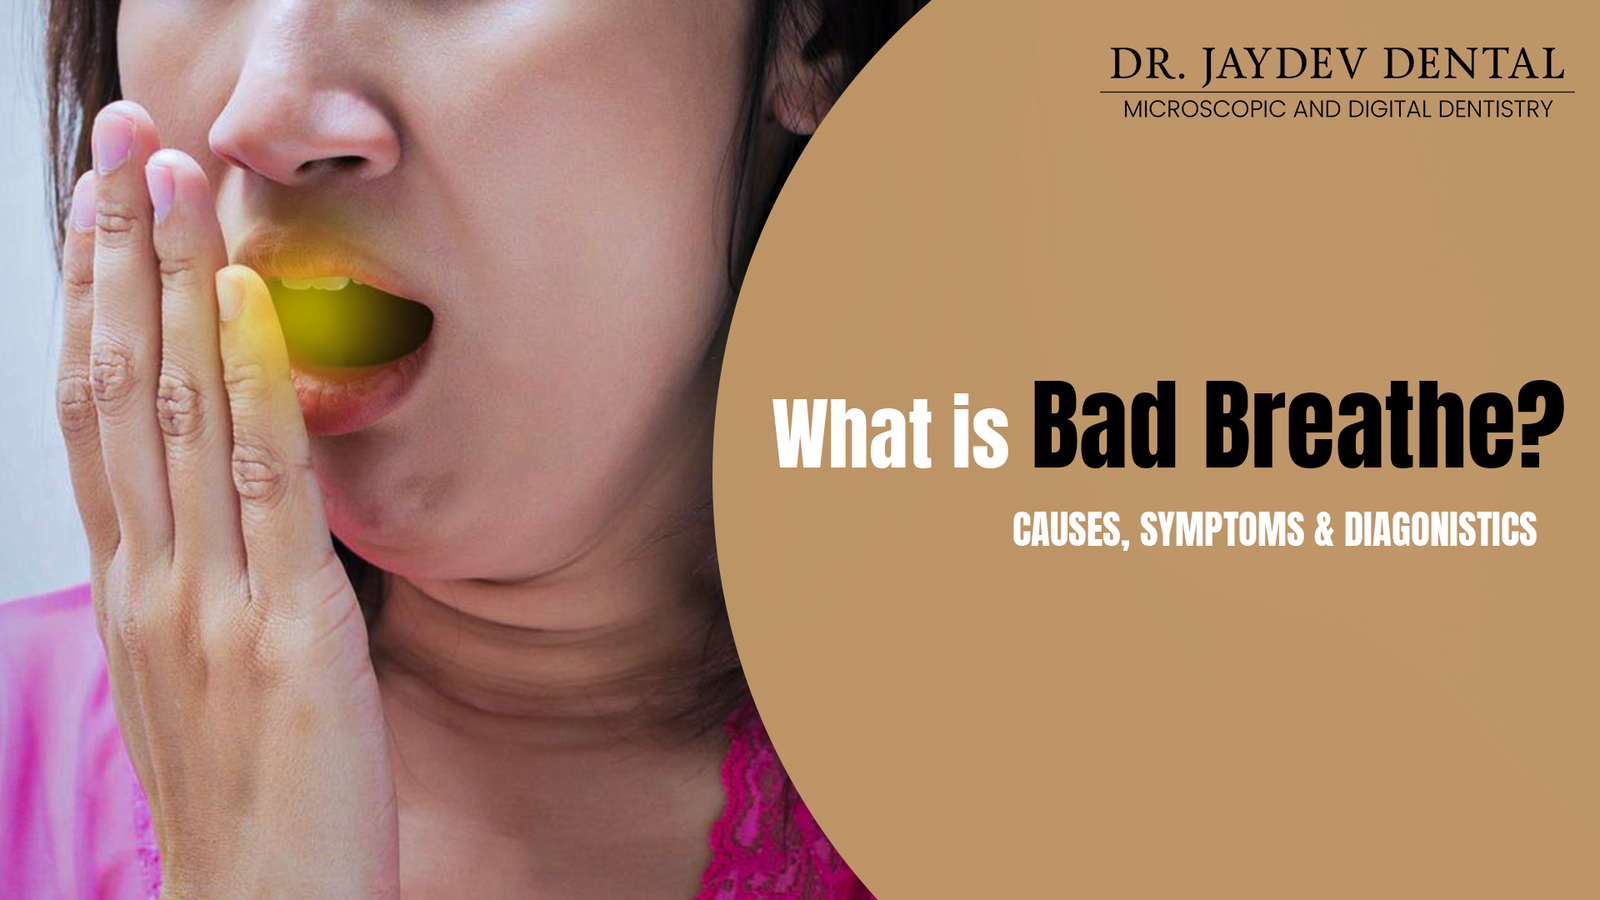 What is Bad Breathe? Causes, Symptoms & Diagnosis.